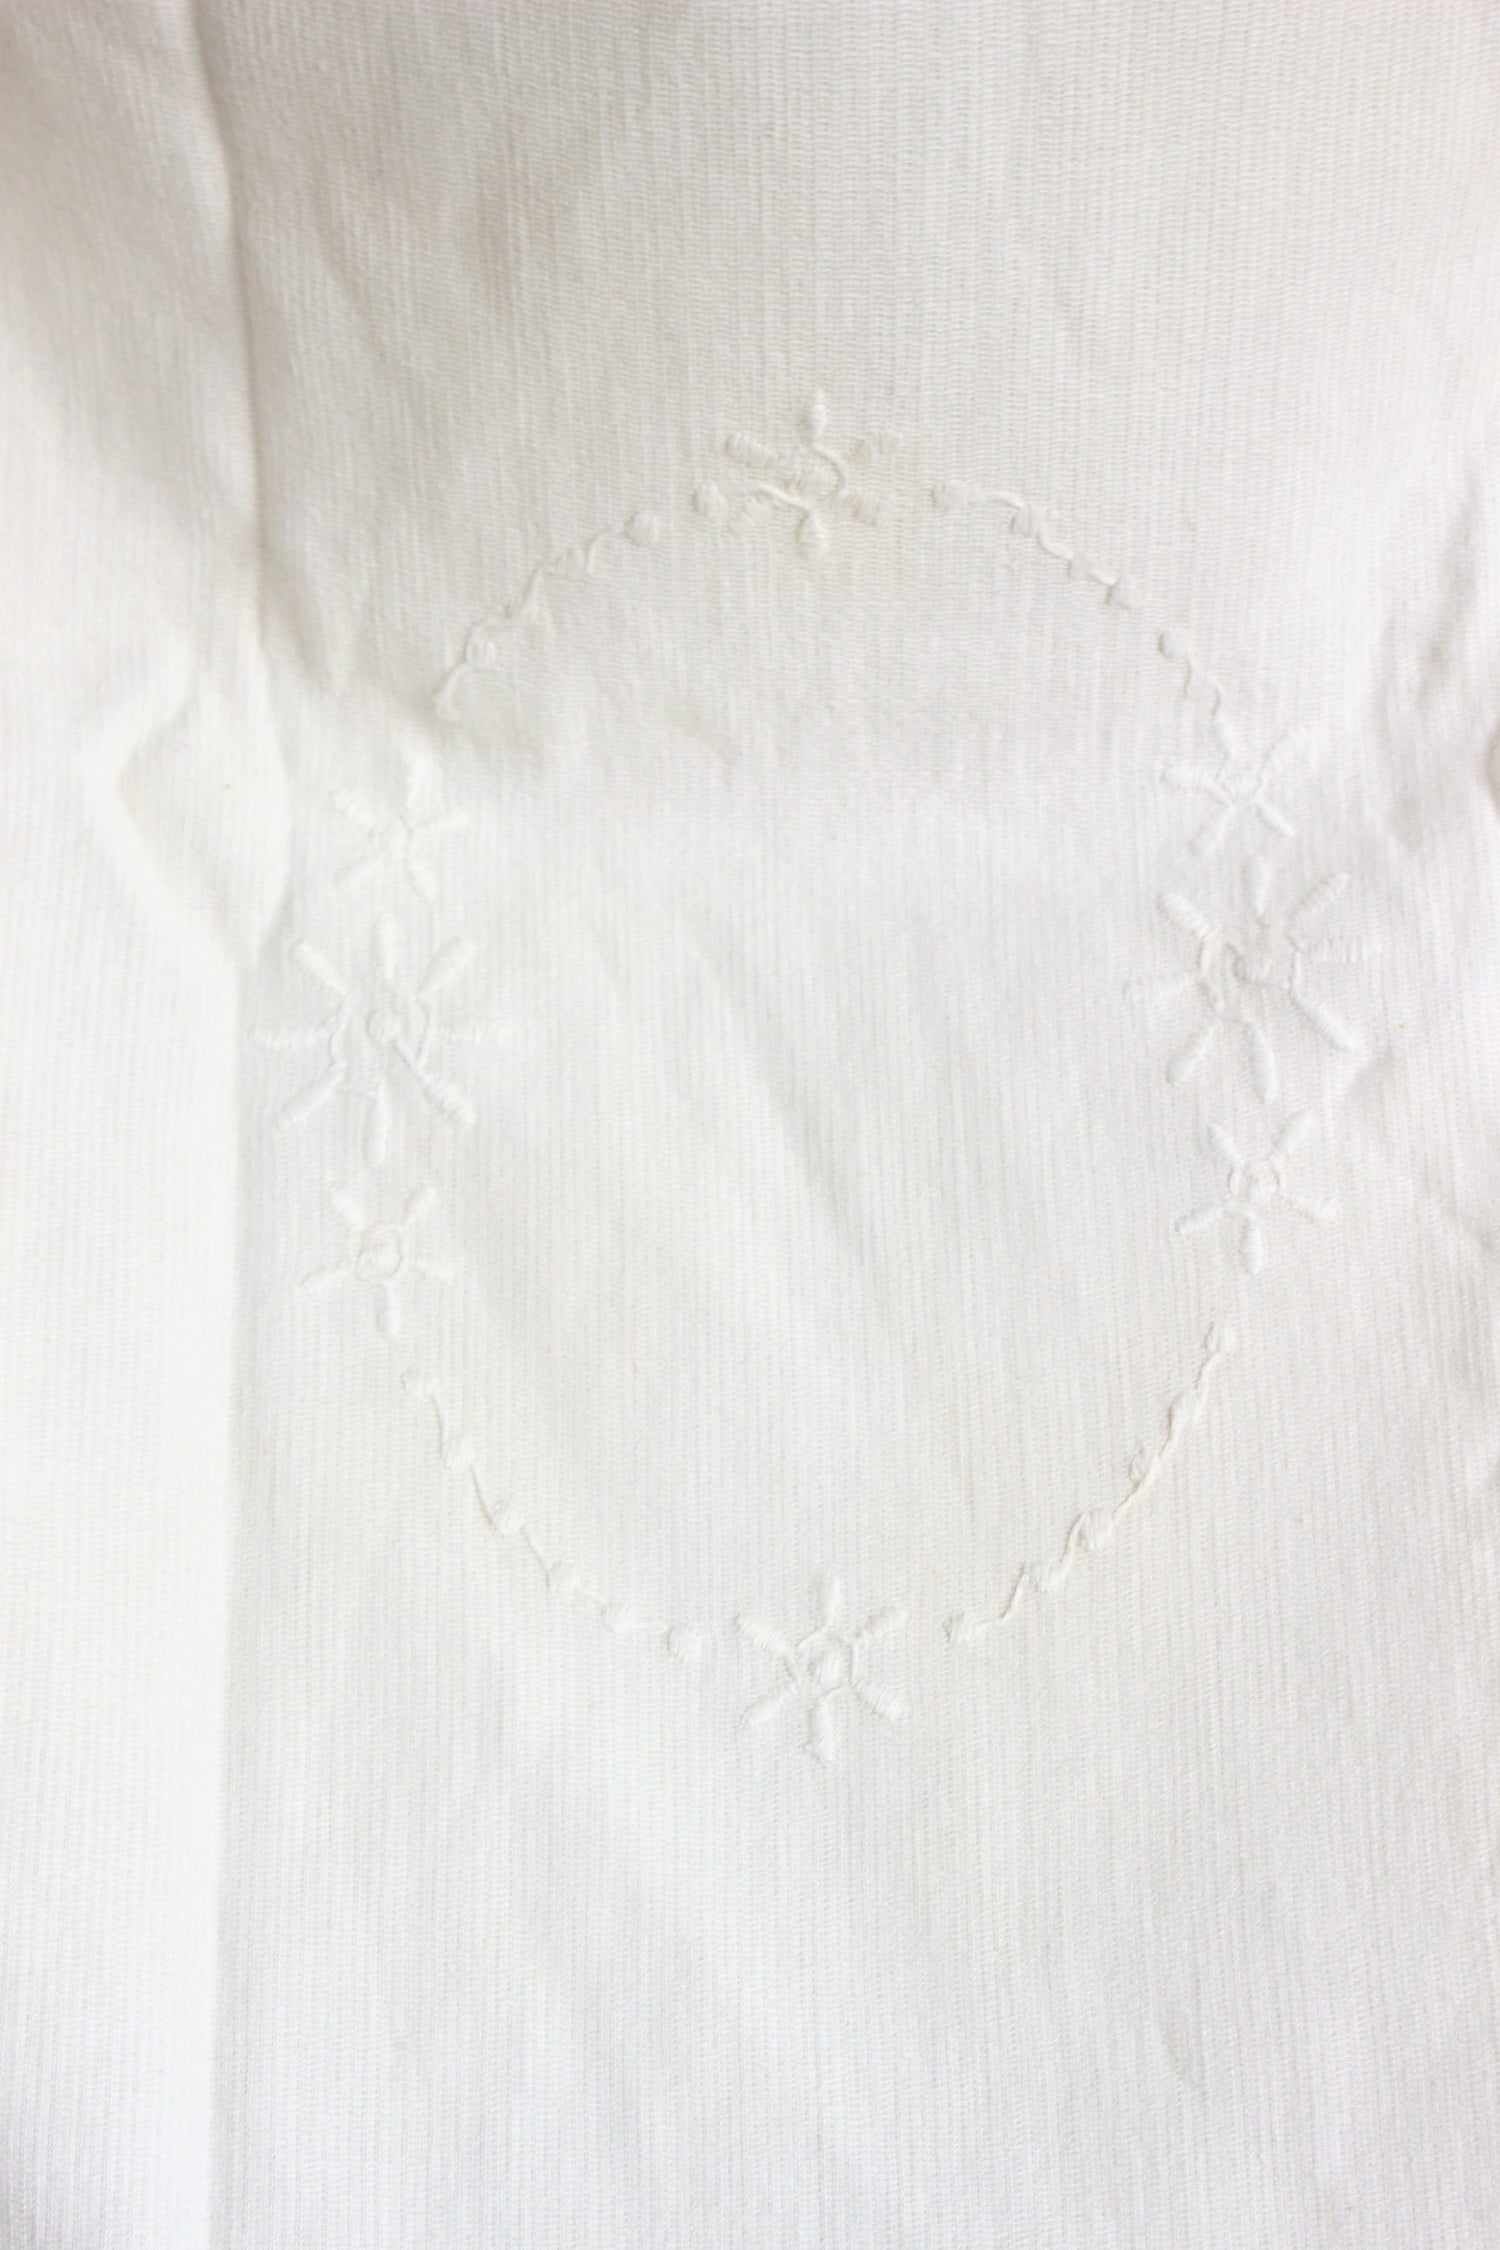 Vintage 1940s Embroidered Cotton Towell